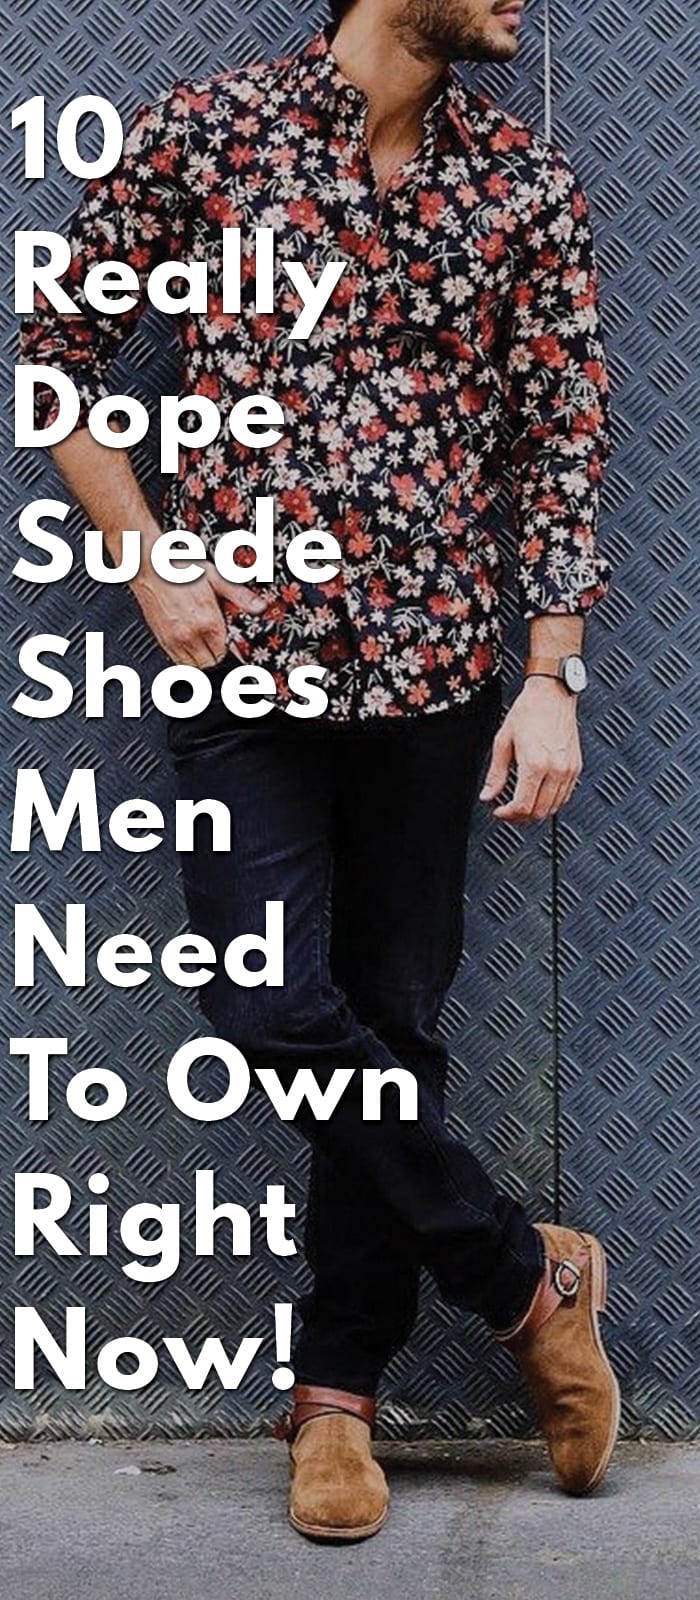 10-Really-Dope-Suede-Shoes-Men-Need-To-Own-Right-Now!